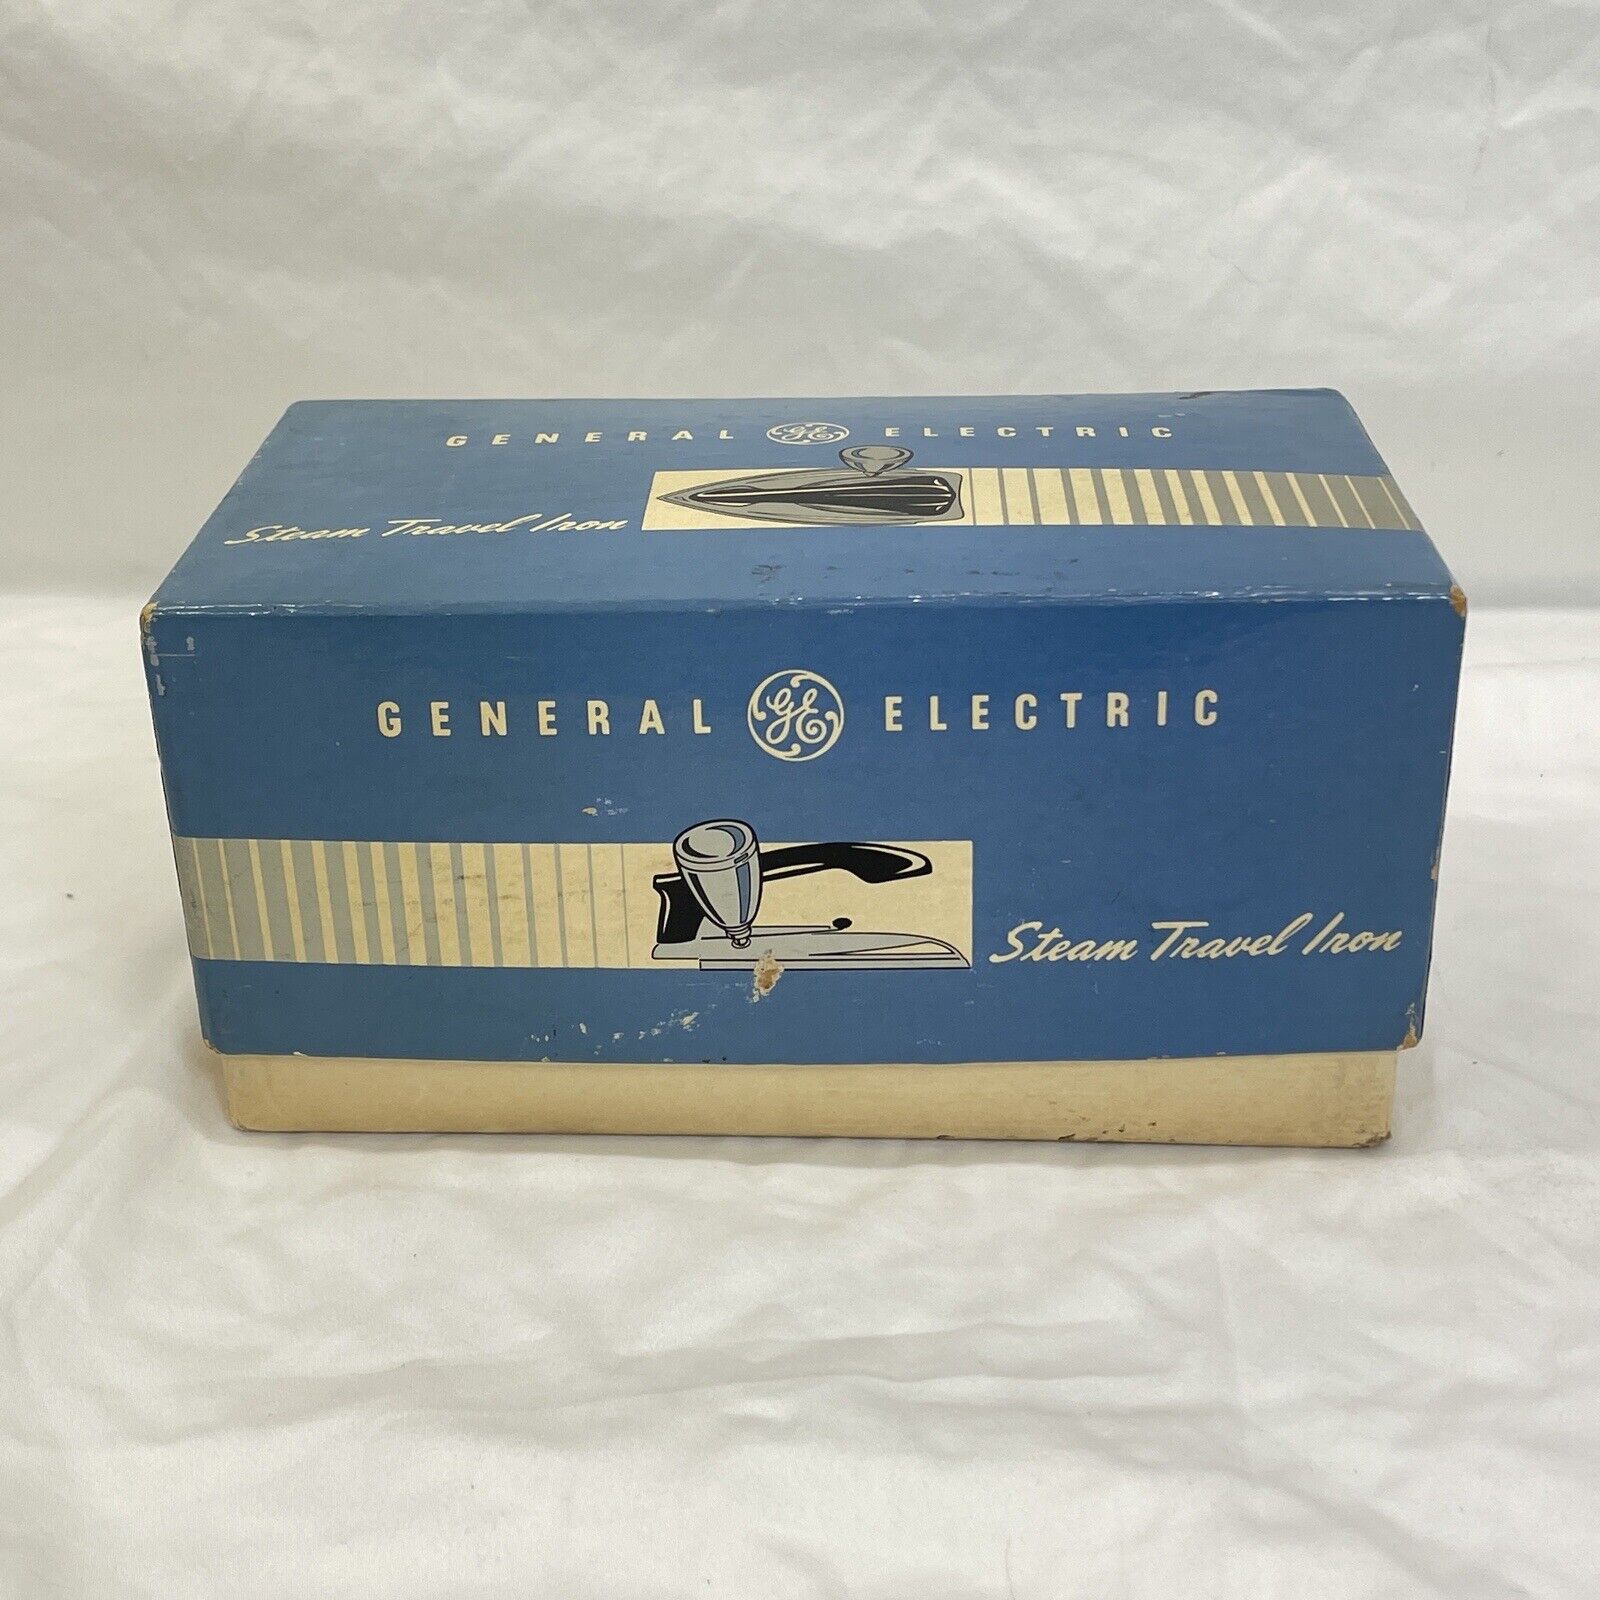 VINTAGE GENERAL ELECTRIC STEAM TRAVEL IRON 1950's 